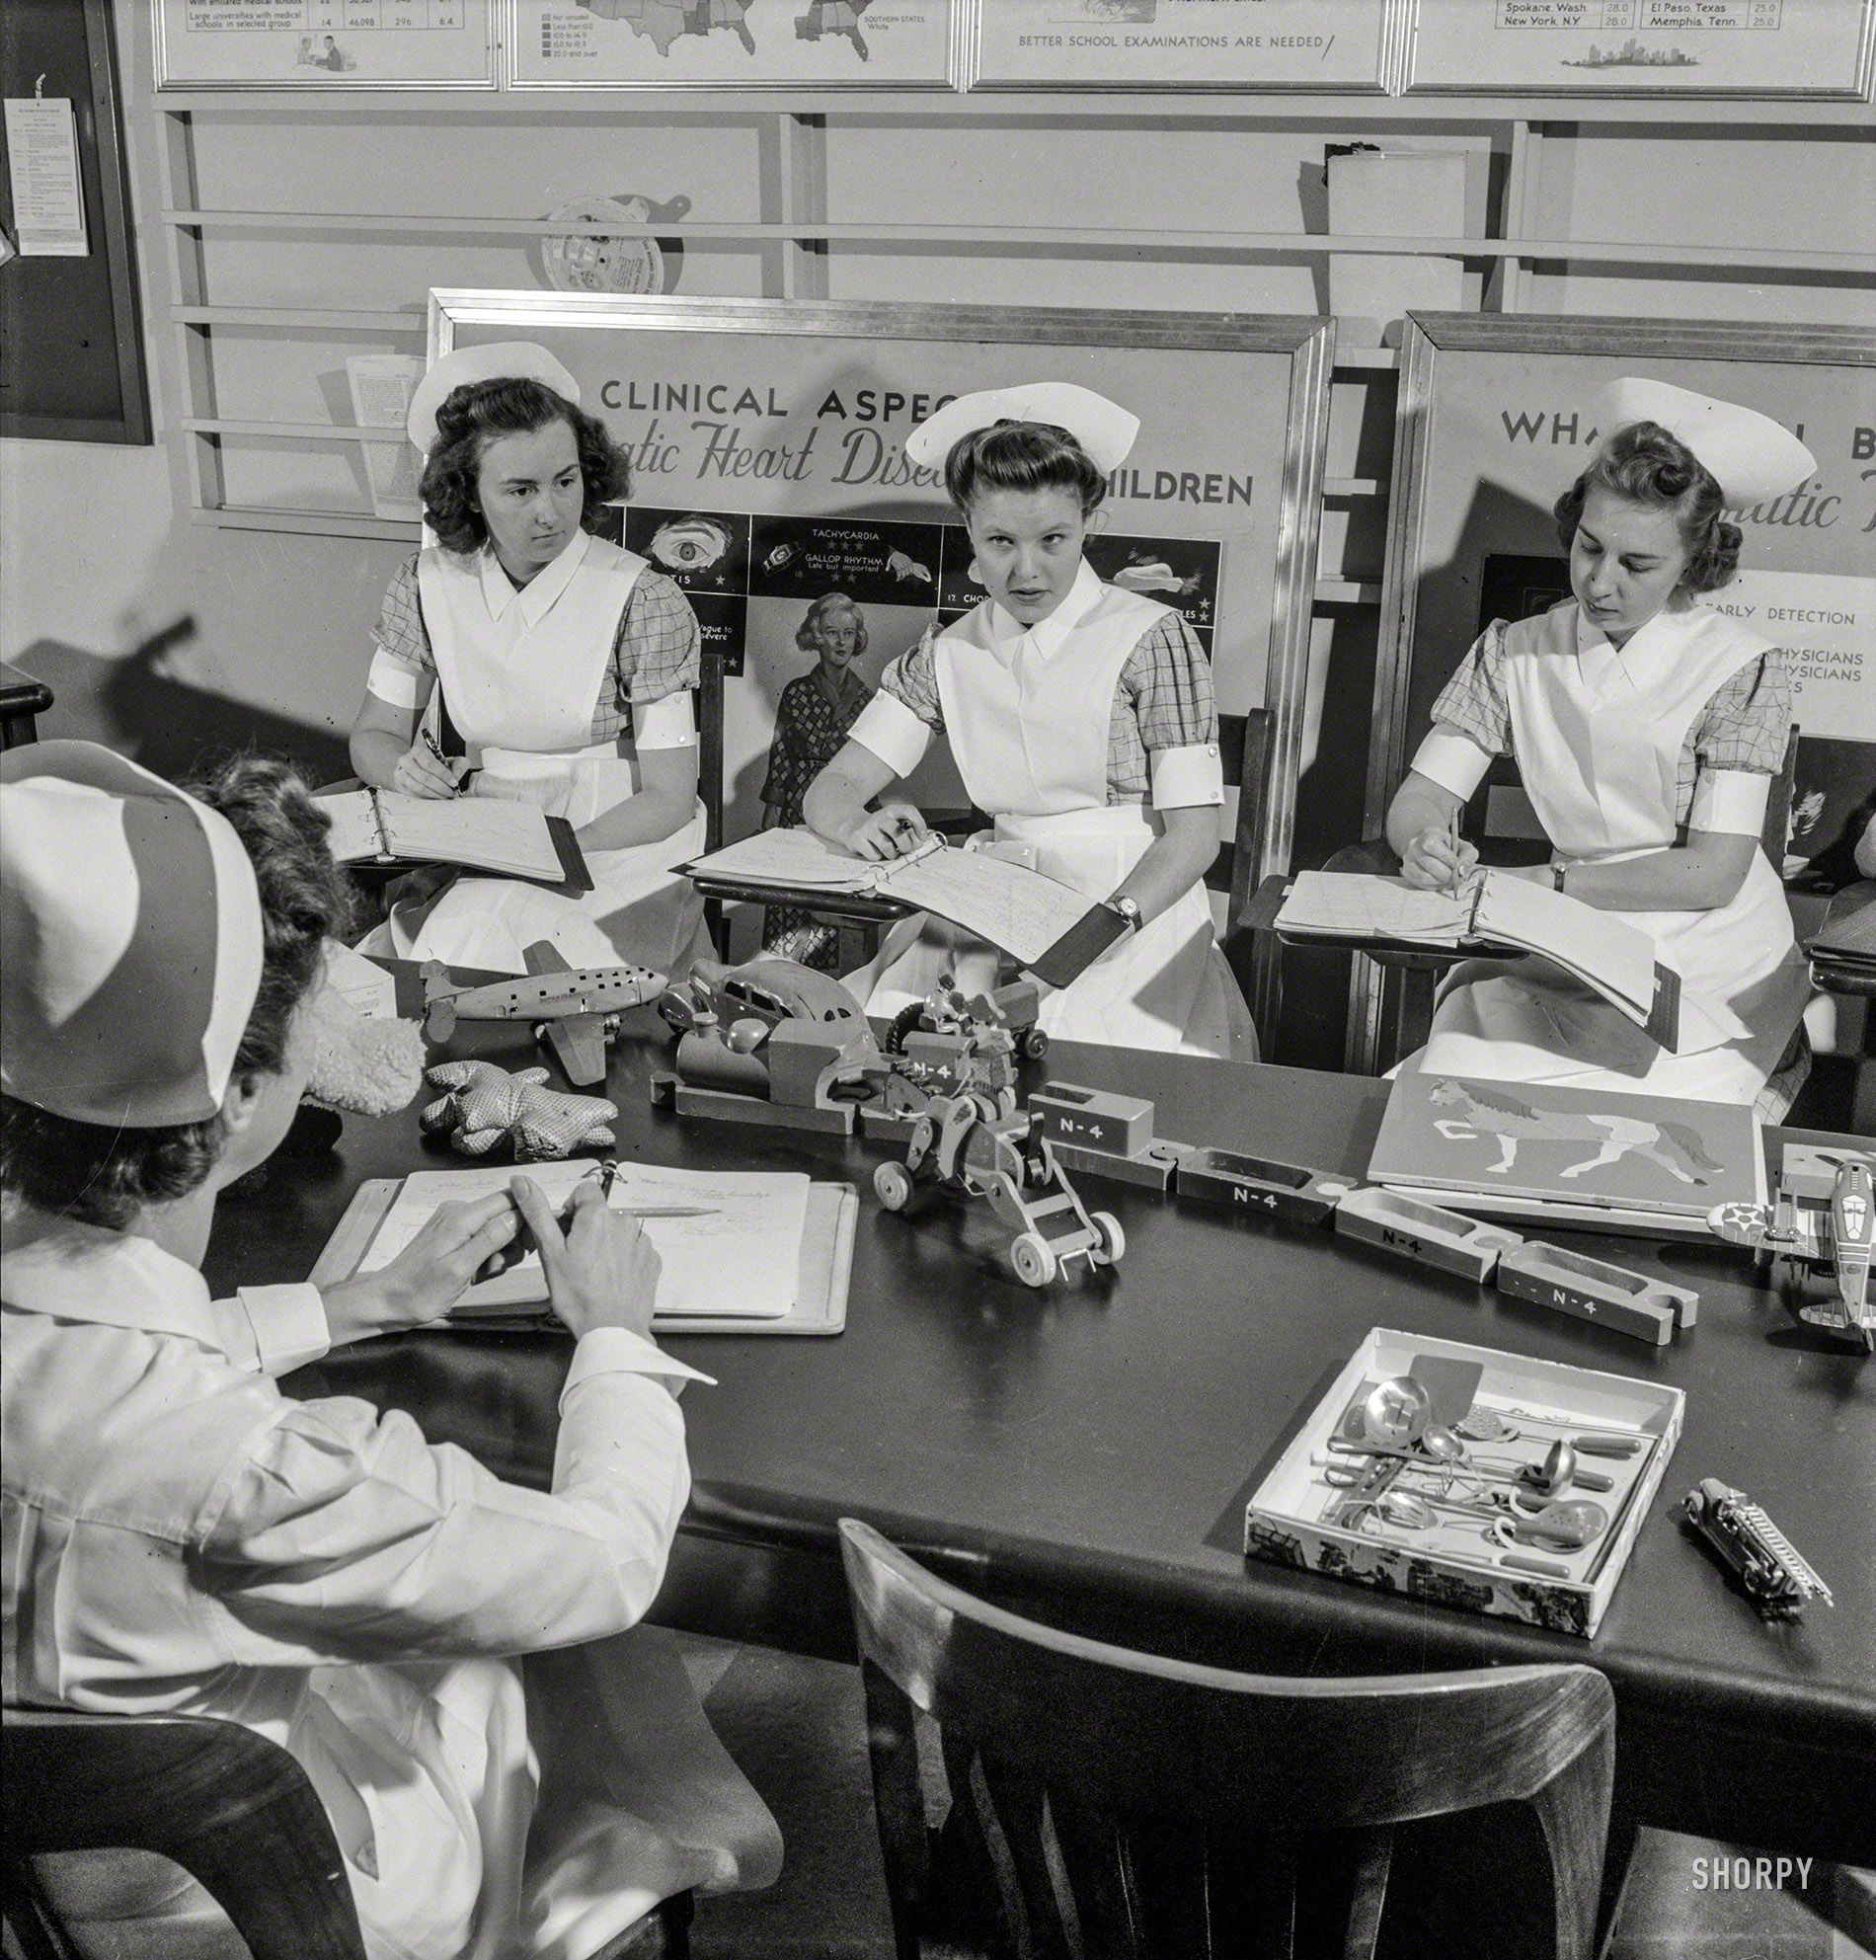 November 1942. Babies' Hospital, New York. "Nurse training. Through classes in pediatrics, student nurses learn how the right toys can be almost as important as medicine and diet in getting a sick child well. Encouraging an interest in play and normal activities of childhood hastens convalescence." Medium format nitrate negative by Fritz Henle for the Office of War Information. View full size.